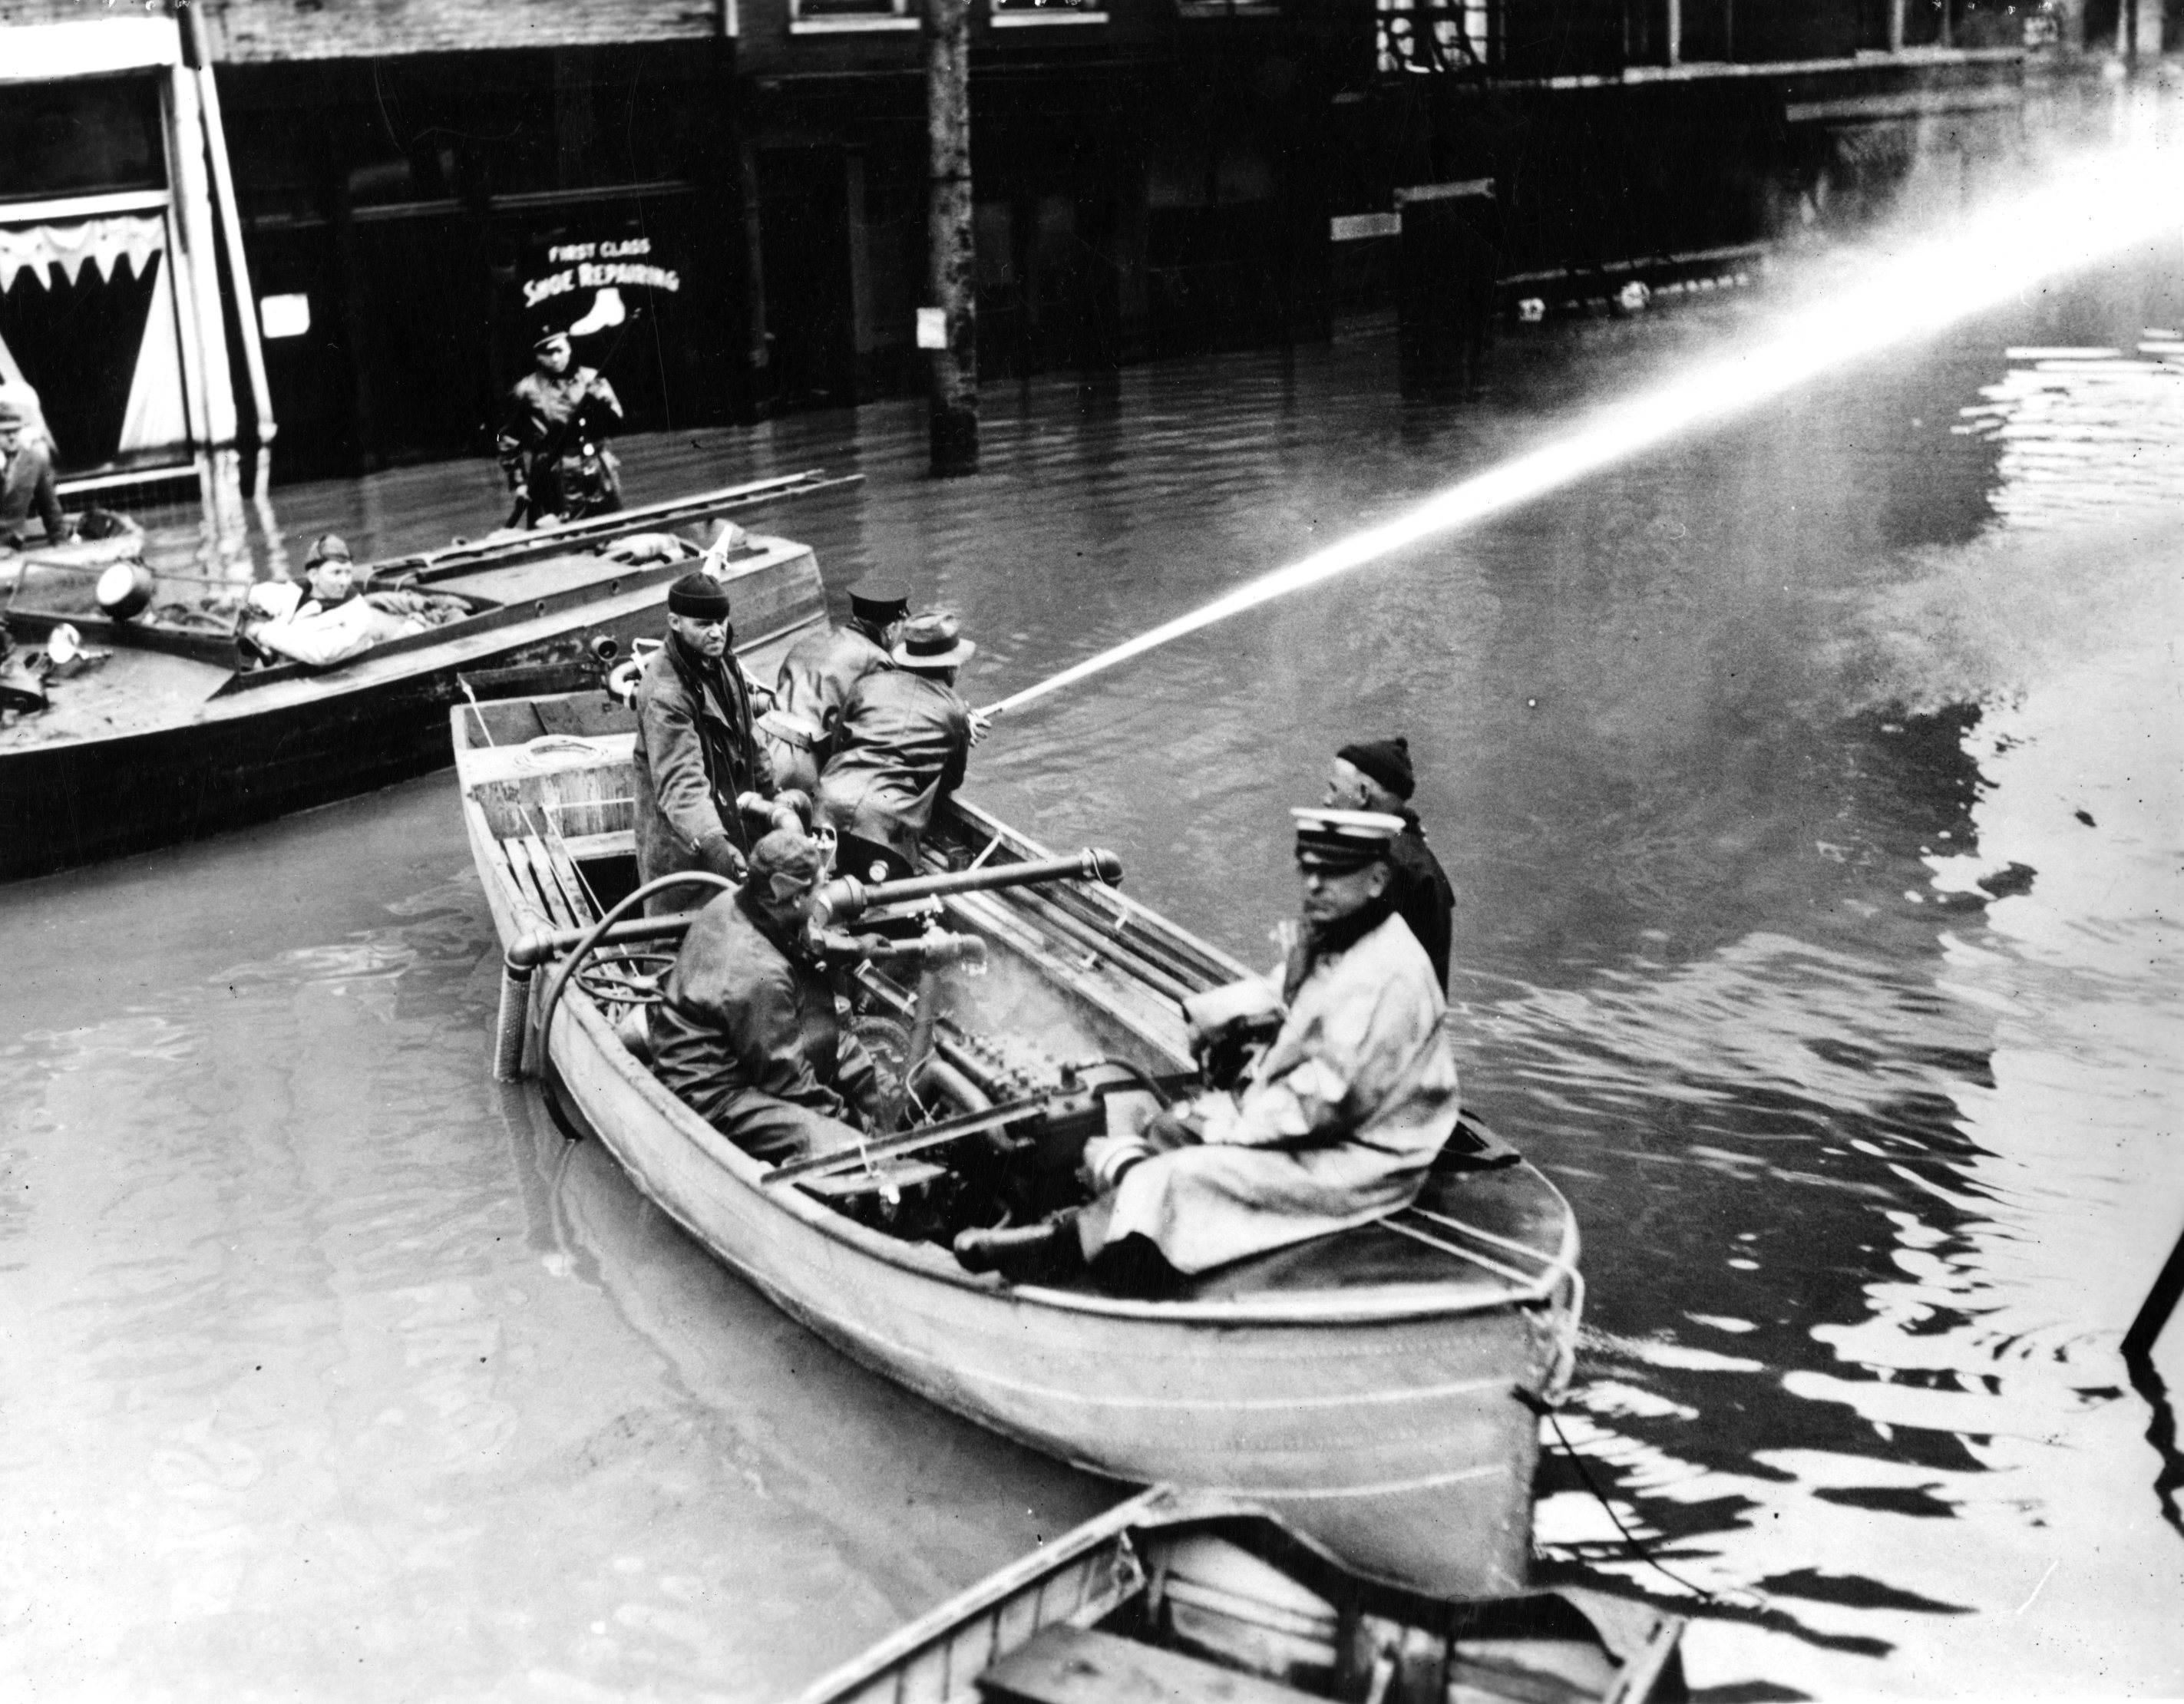 7.	Coast Guardsmen rig a watercraft as a fireboat by pumping floodwater to feed their firehose fighting a conflagration in downtown Cincinnati. (U.S. Coast Guard)